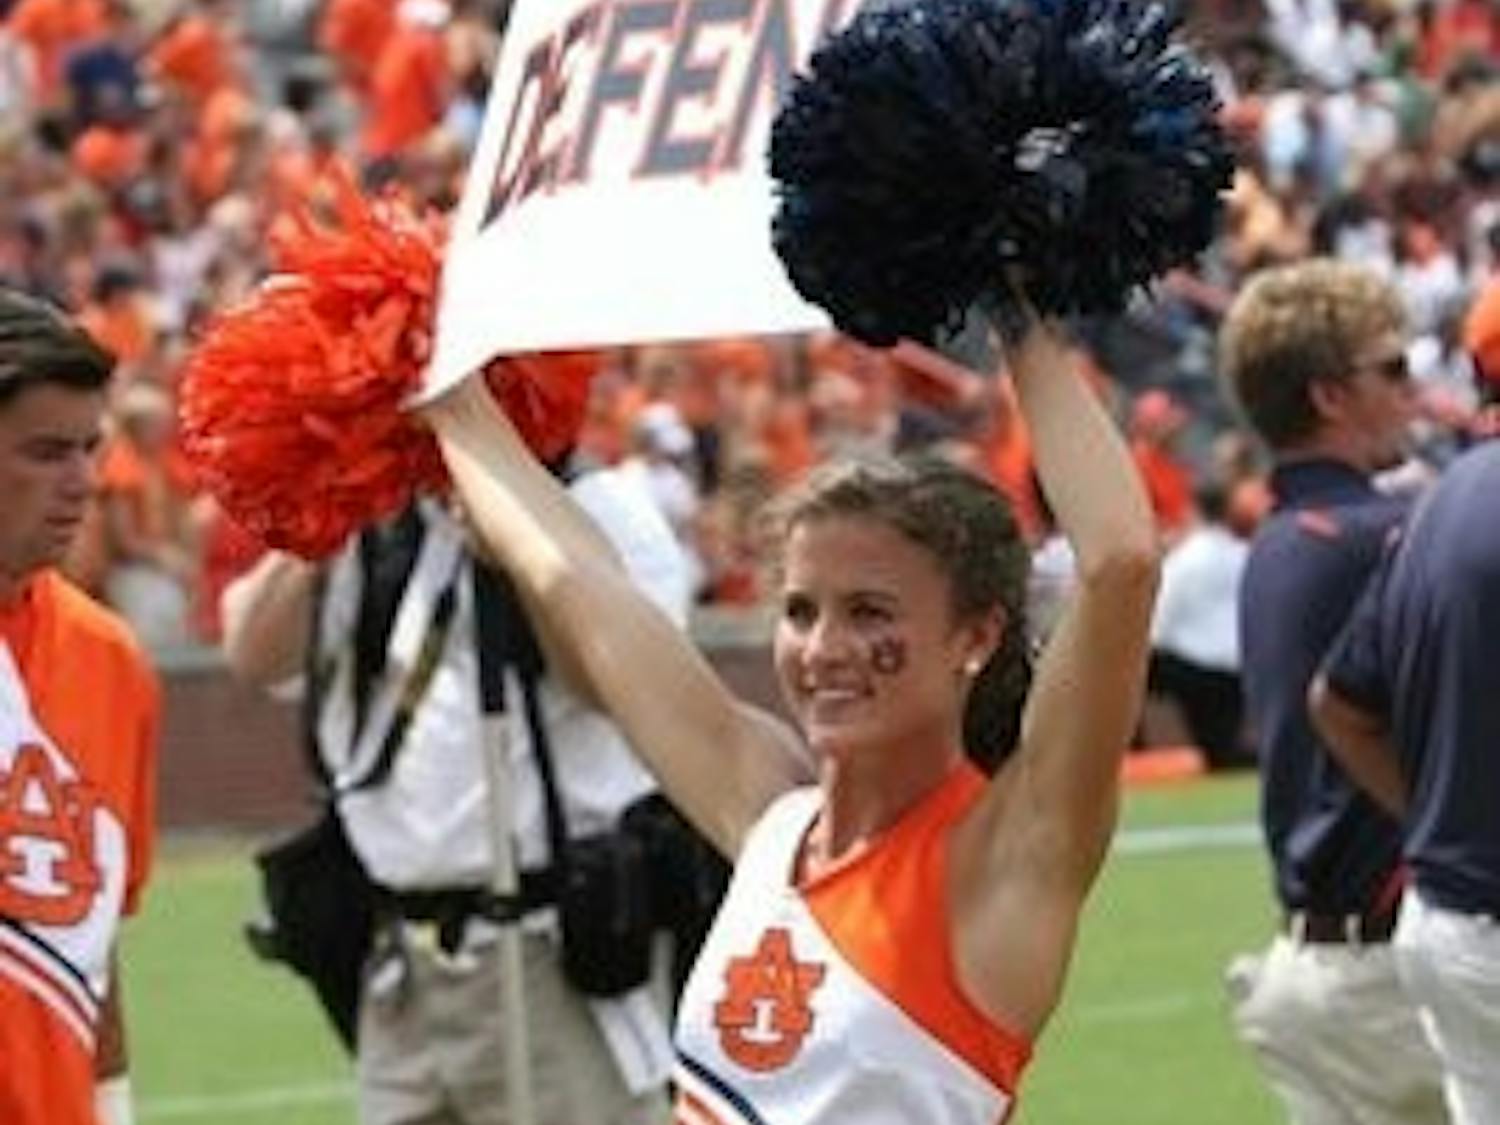 Caroline Dunklin, junior cheerleader, shows spirit during a home football game. (CONTRIBUTED)